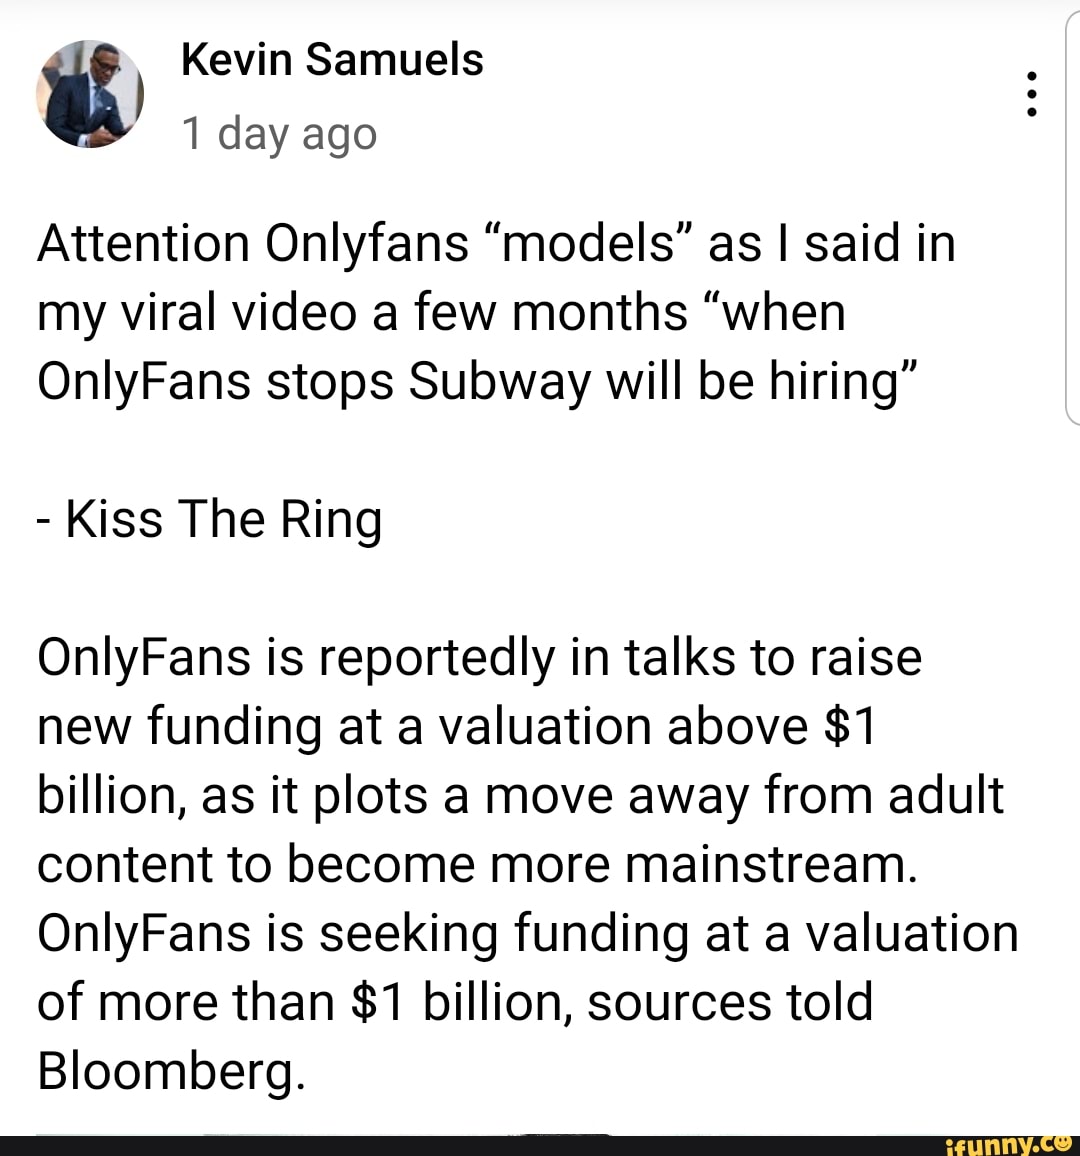 When onlyfans stops subway will be hiring